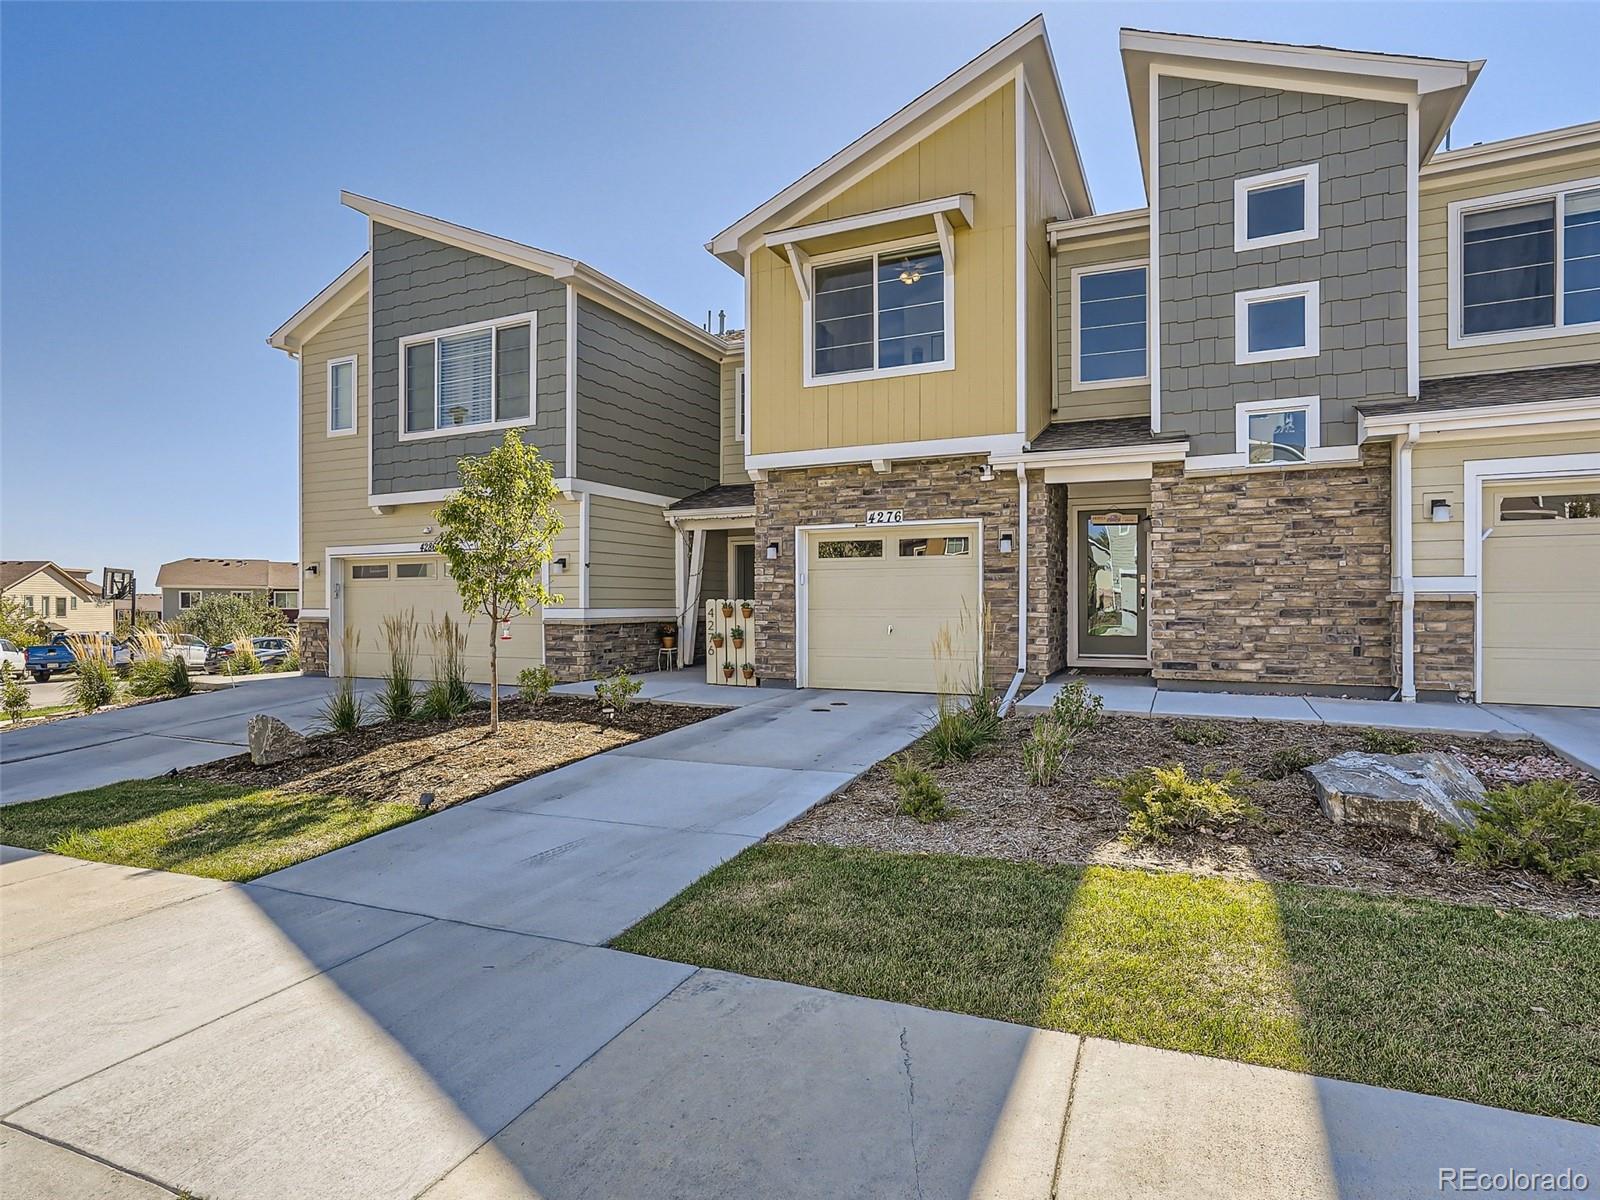 View Thornton, CO 80229 townhome